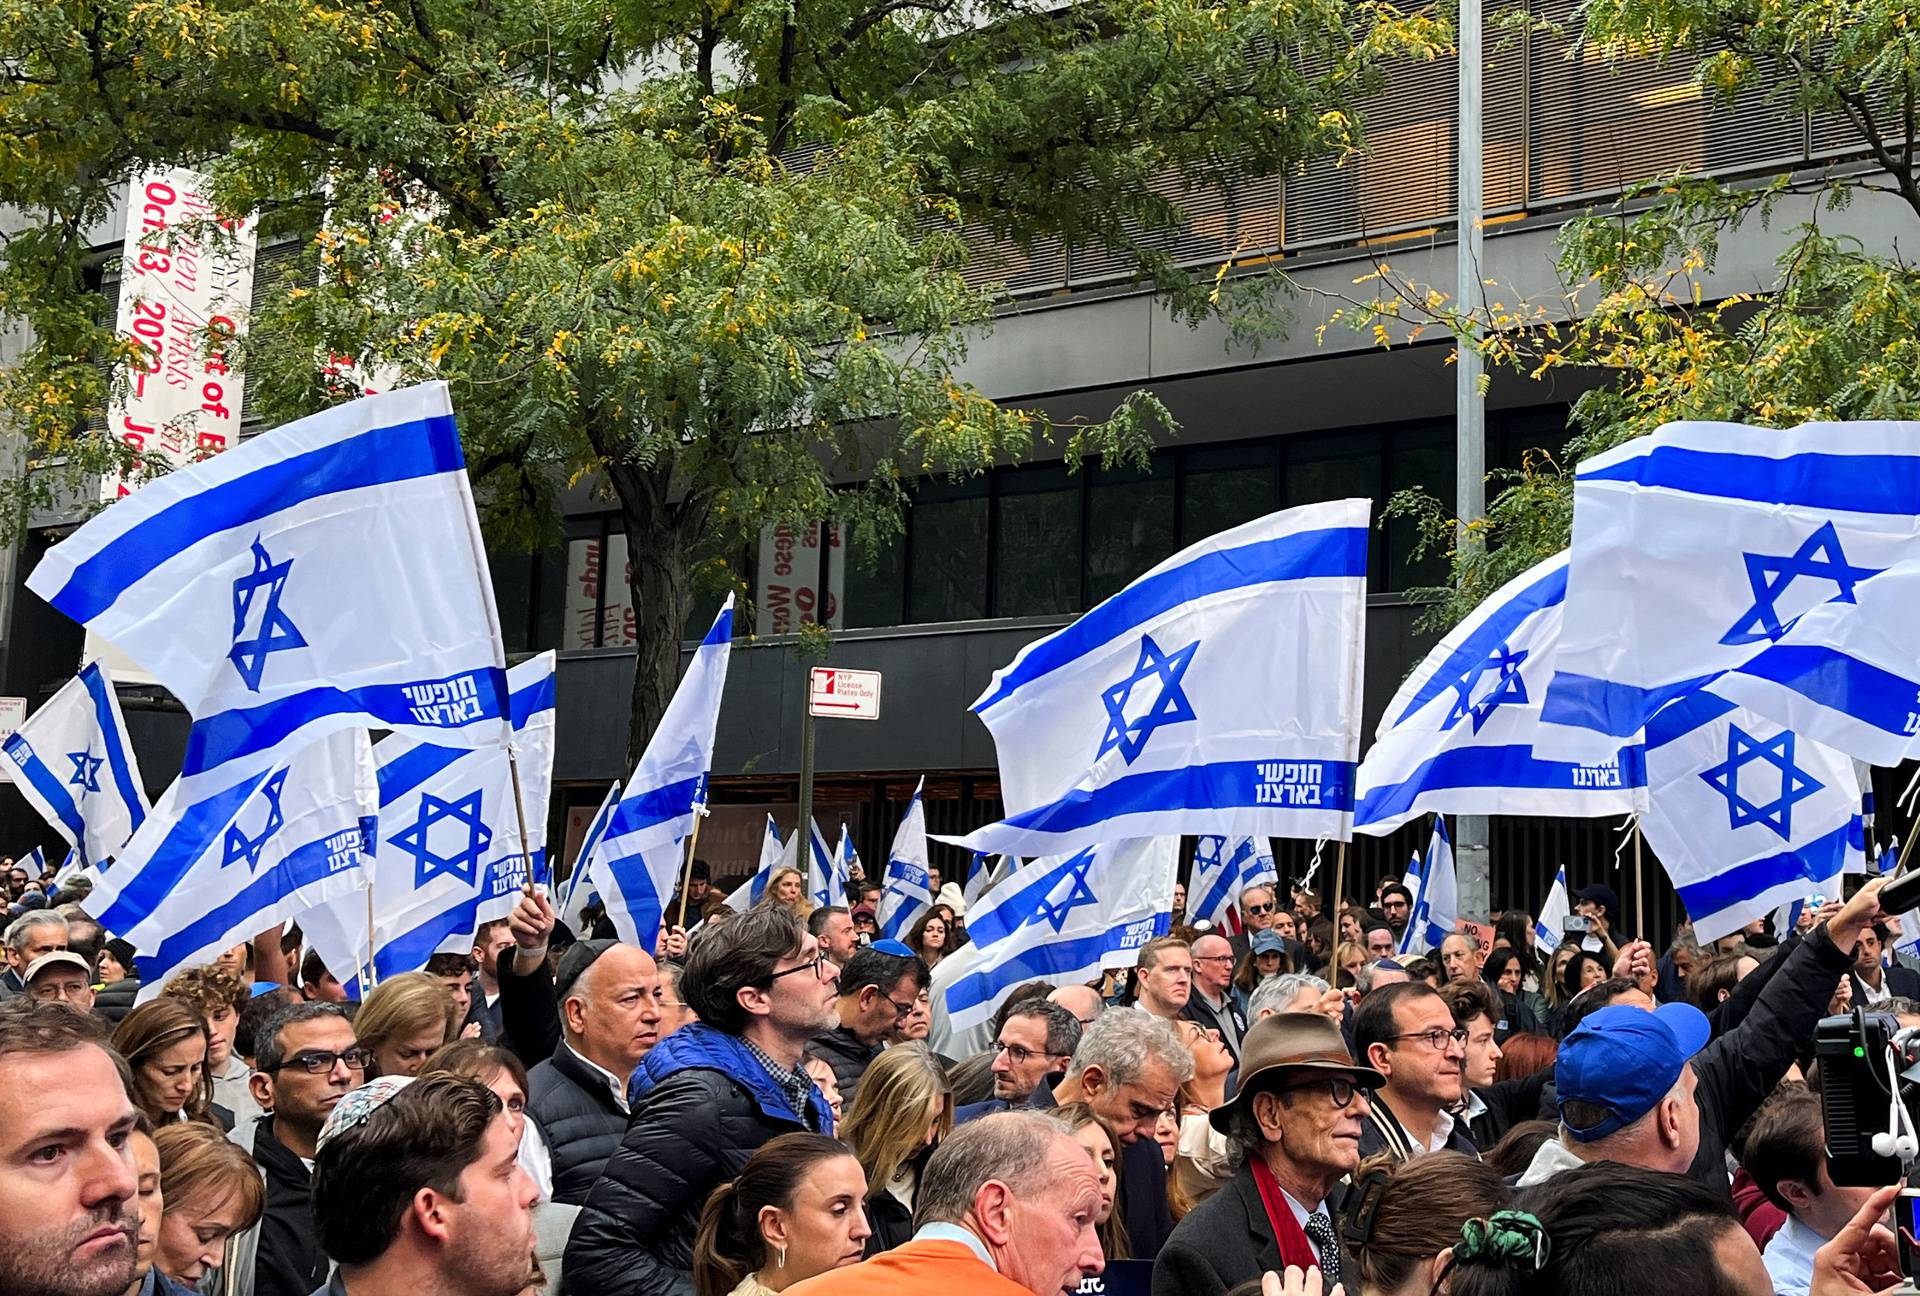 New York Stands with Israel rally